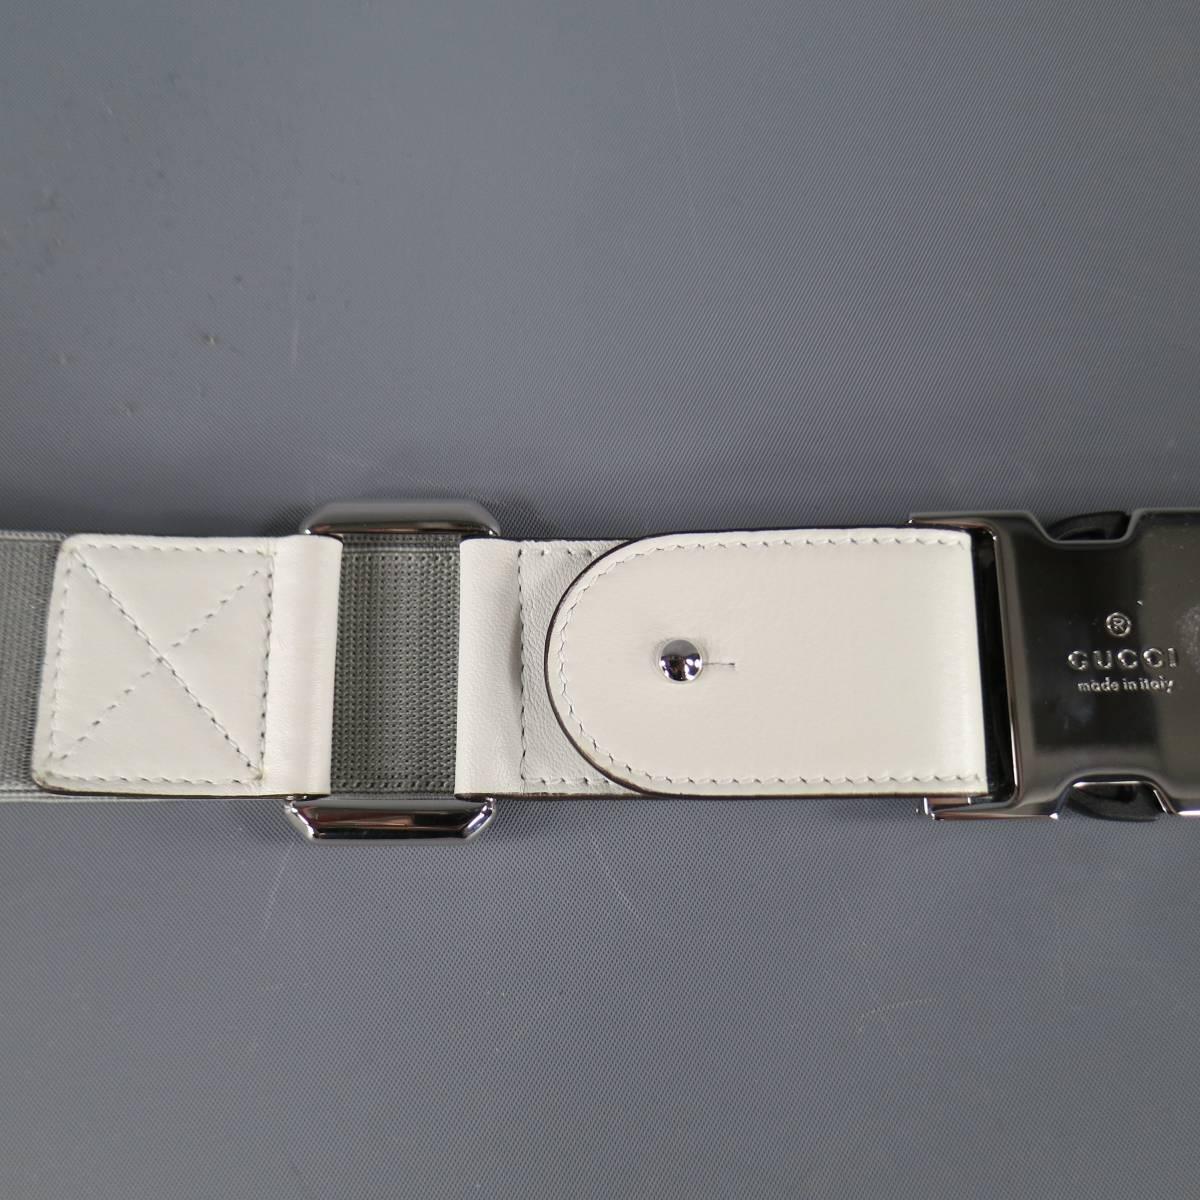 GUCCI elastic belt features utilitarian buckle design with leather accents and chrome shine hardware in gray & white, made in Italy.
 
Excellent Pre-Owned Condition    Marked: 34
 
Measurements:
 
Length: 31 in.
Width: 1.5 in.